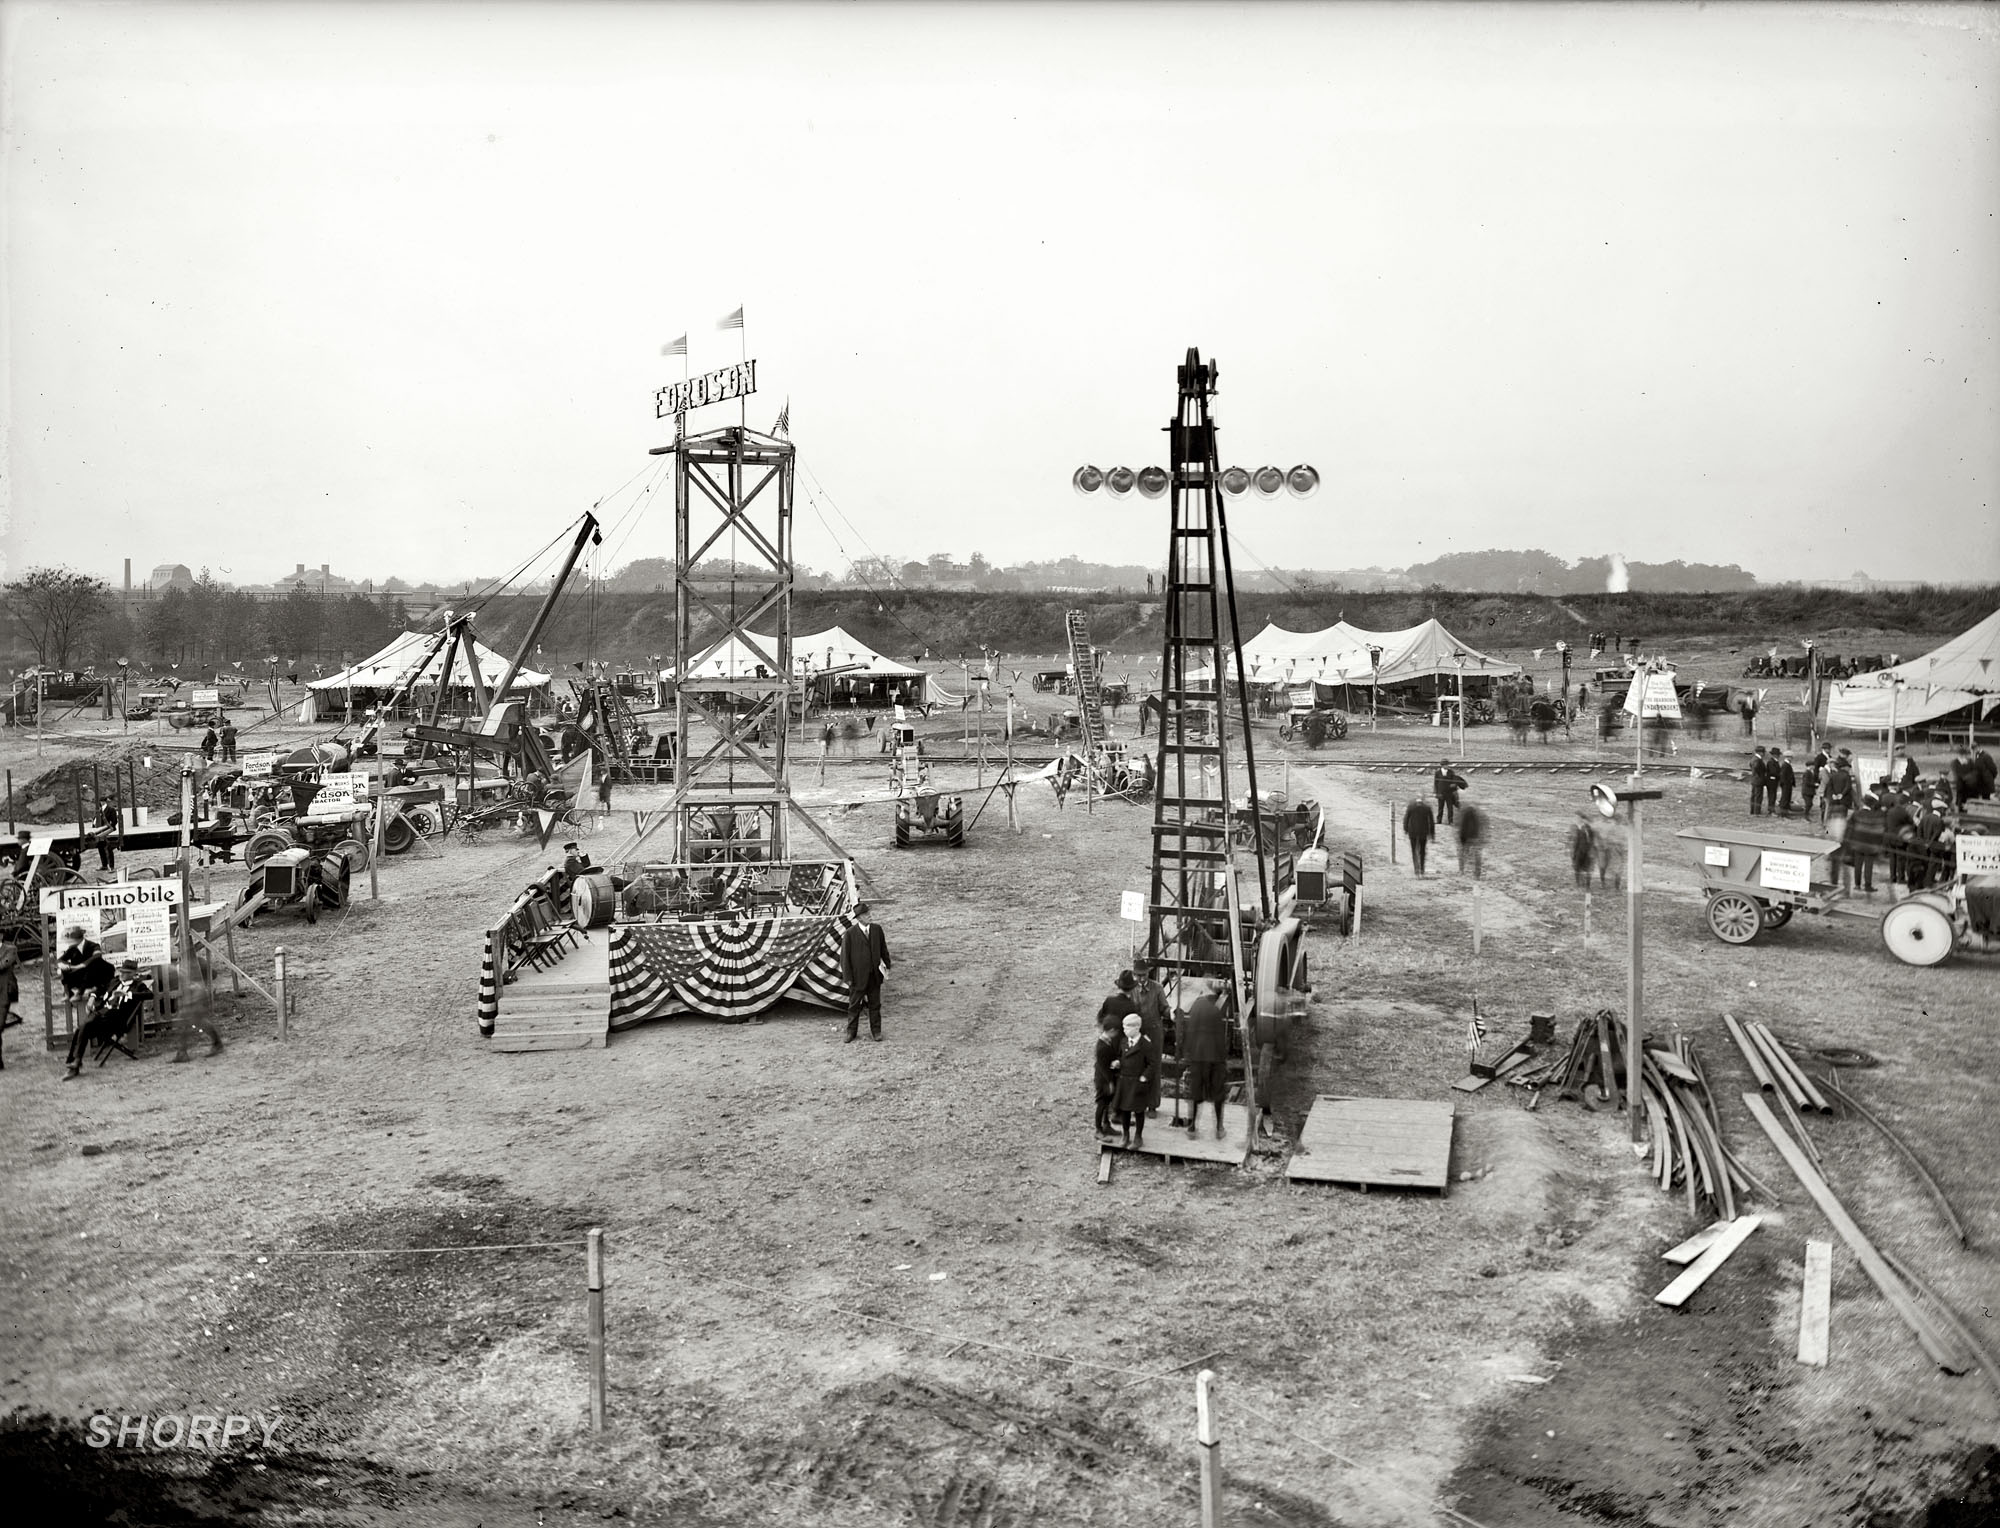 Washington circa 1922. "Ford Motor Co. panorama No. 4." An exhibit of Ford cars and Fordson tractors. National Photo Co. glass negative. View full size.